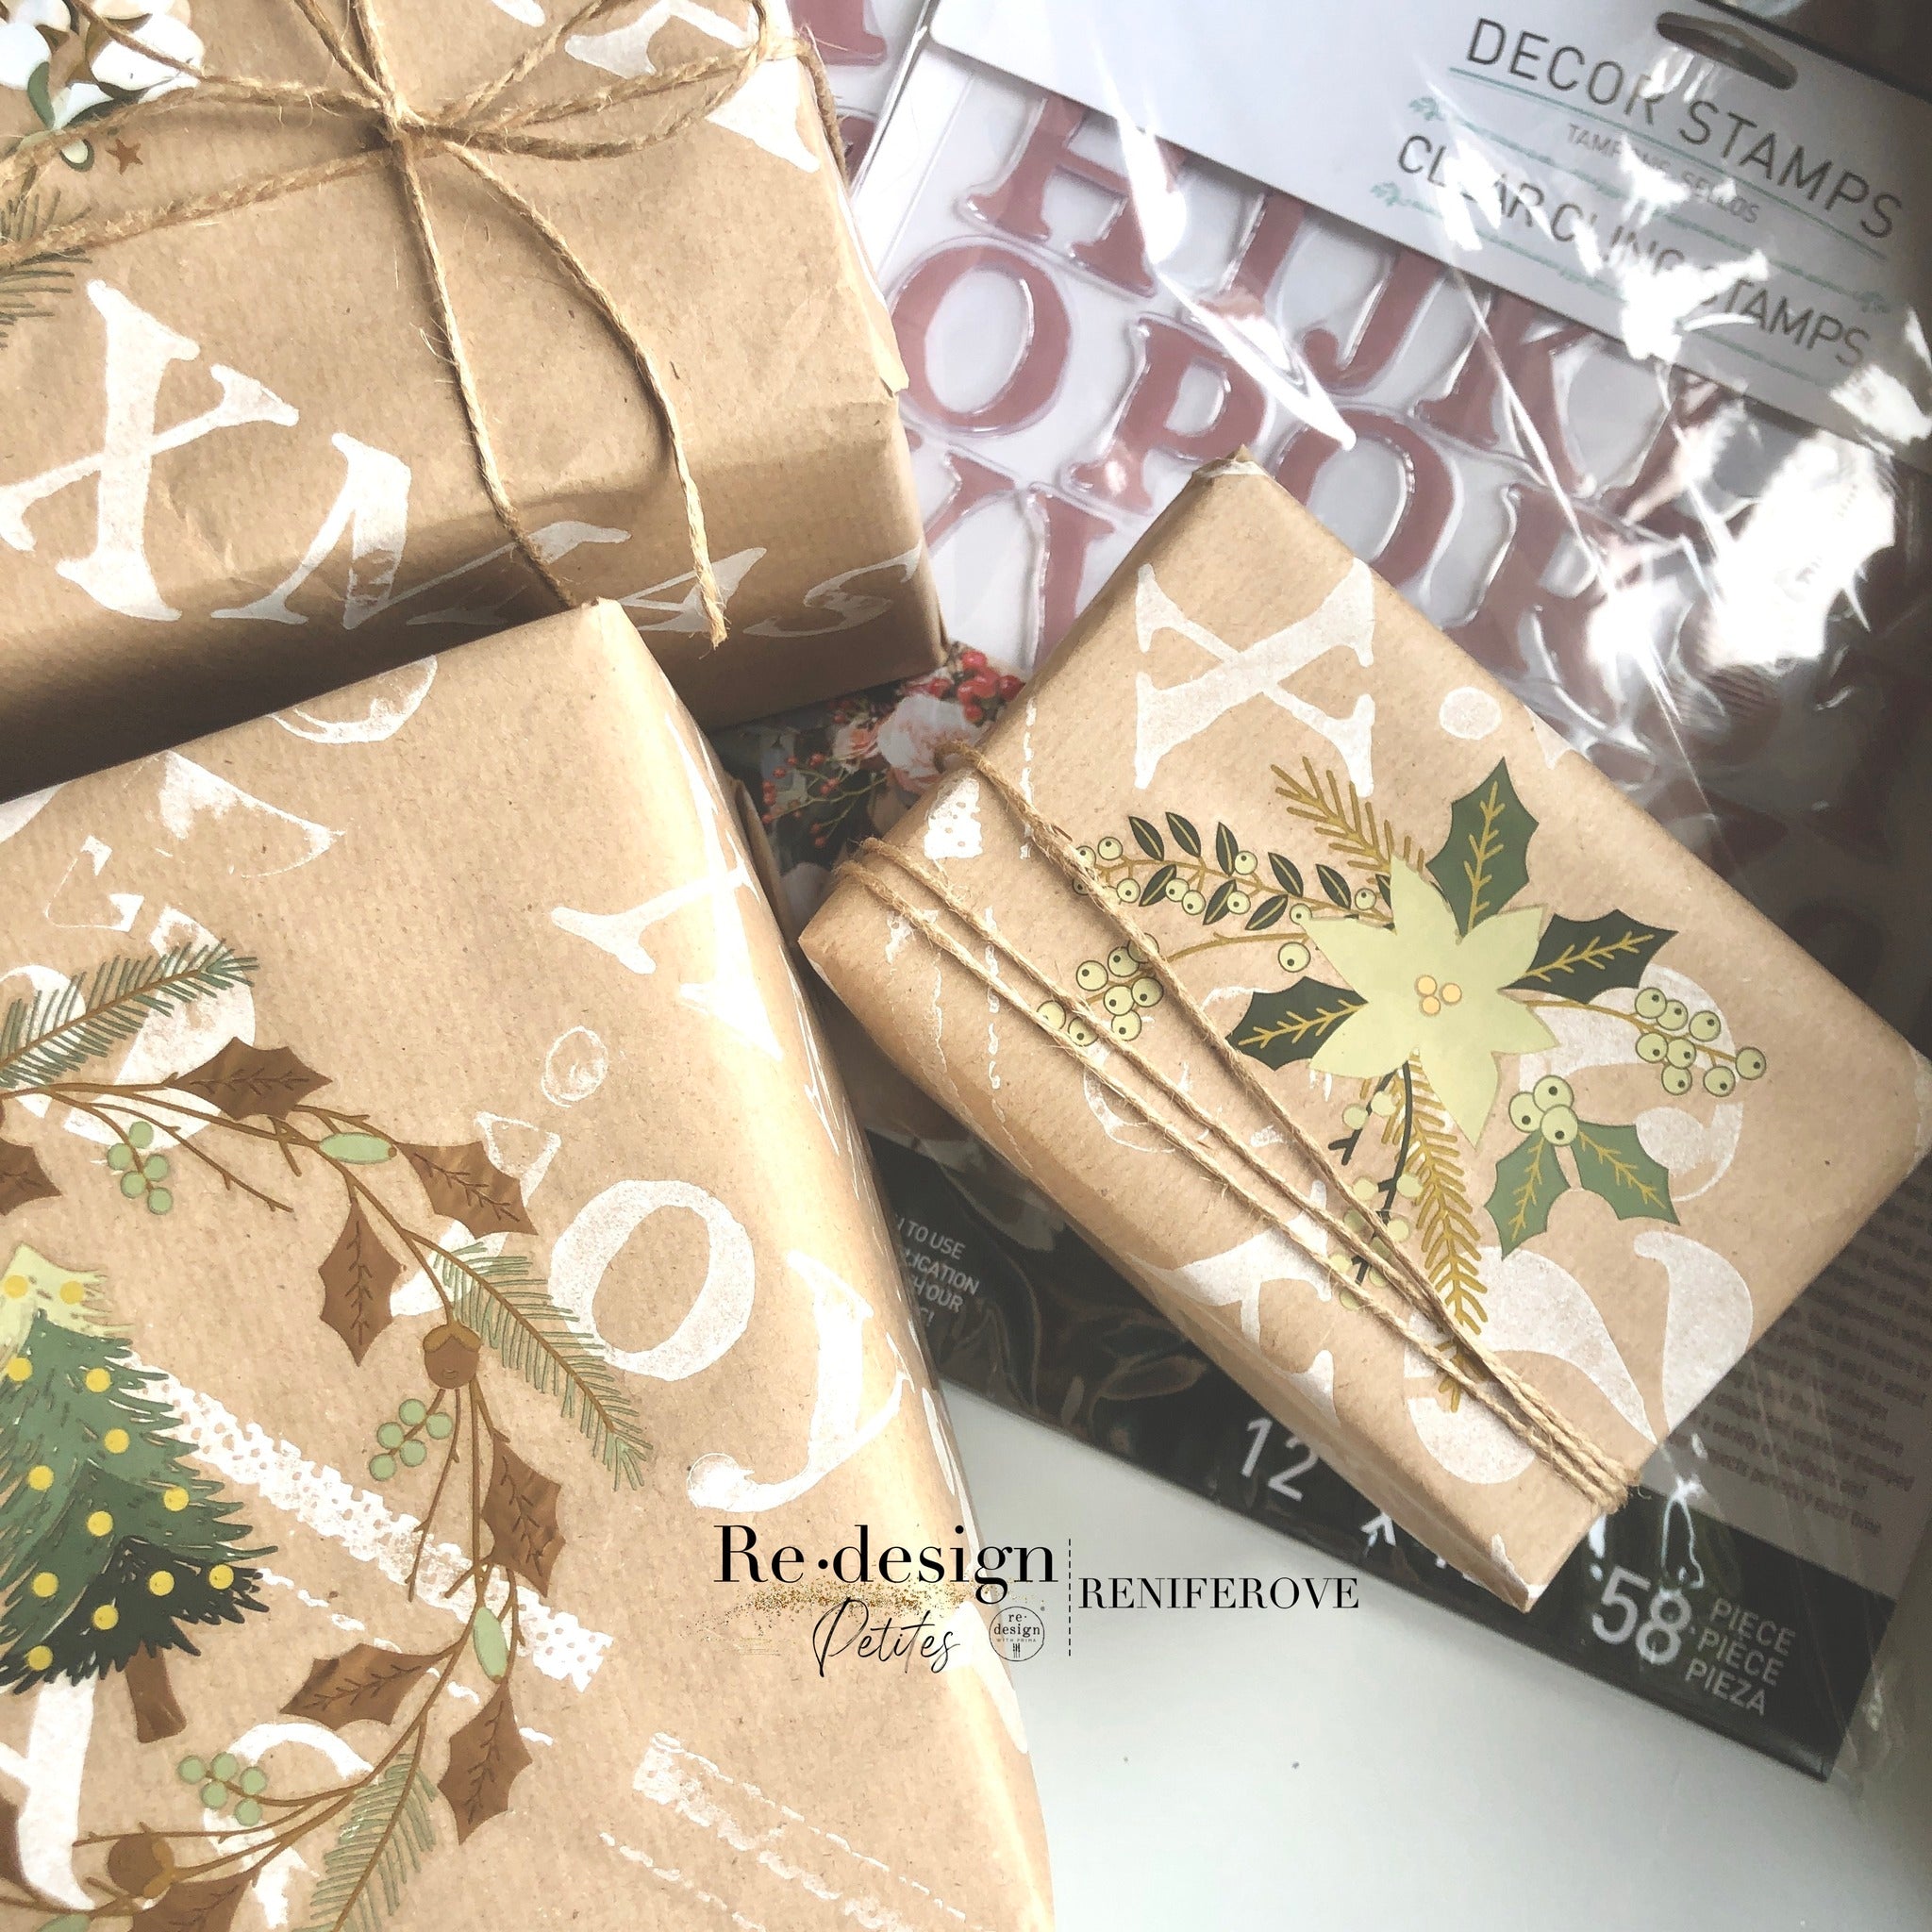 Brown paper wrapped gifts created by Reniferove features ReDesign with Prima's Holiday Spirit small transfers on them.